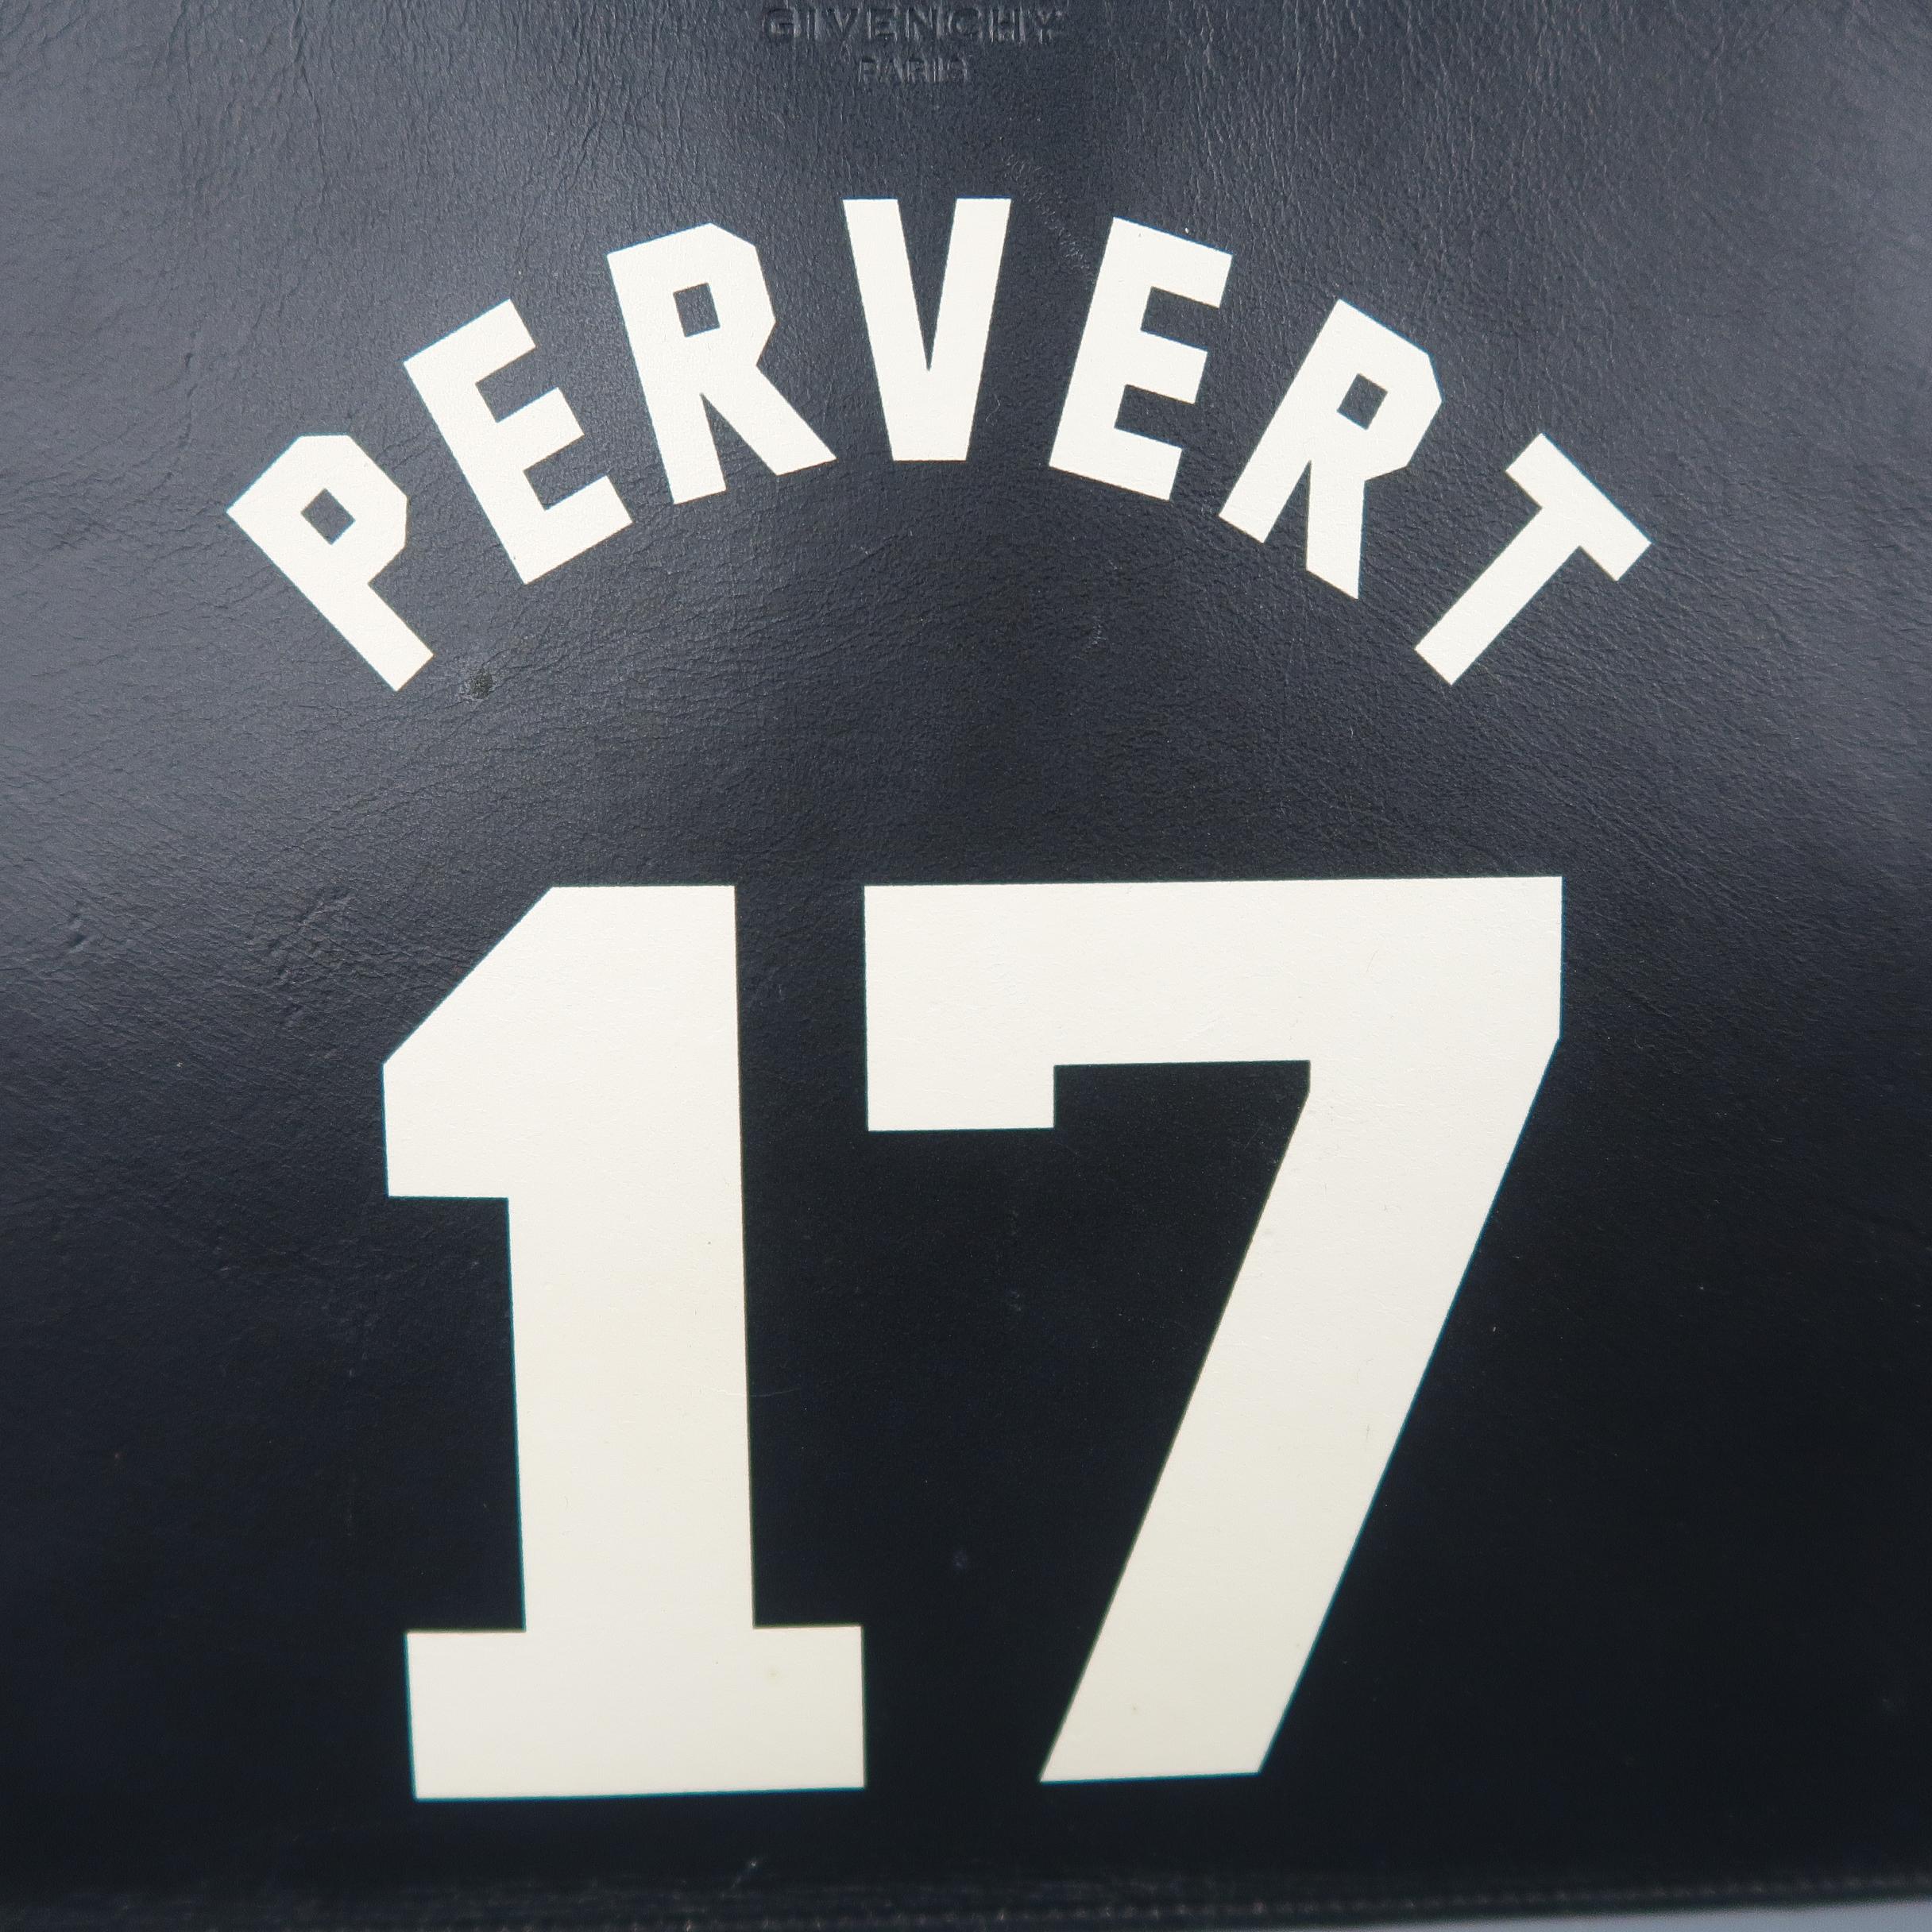 givenchy pervert 17 meaning